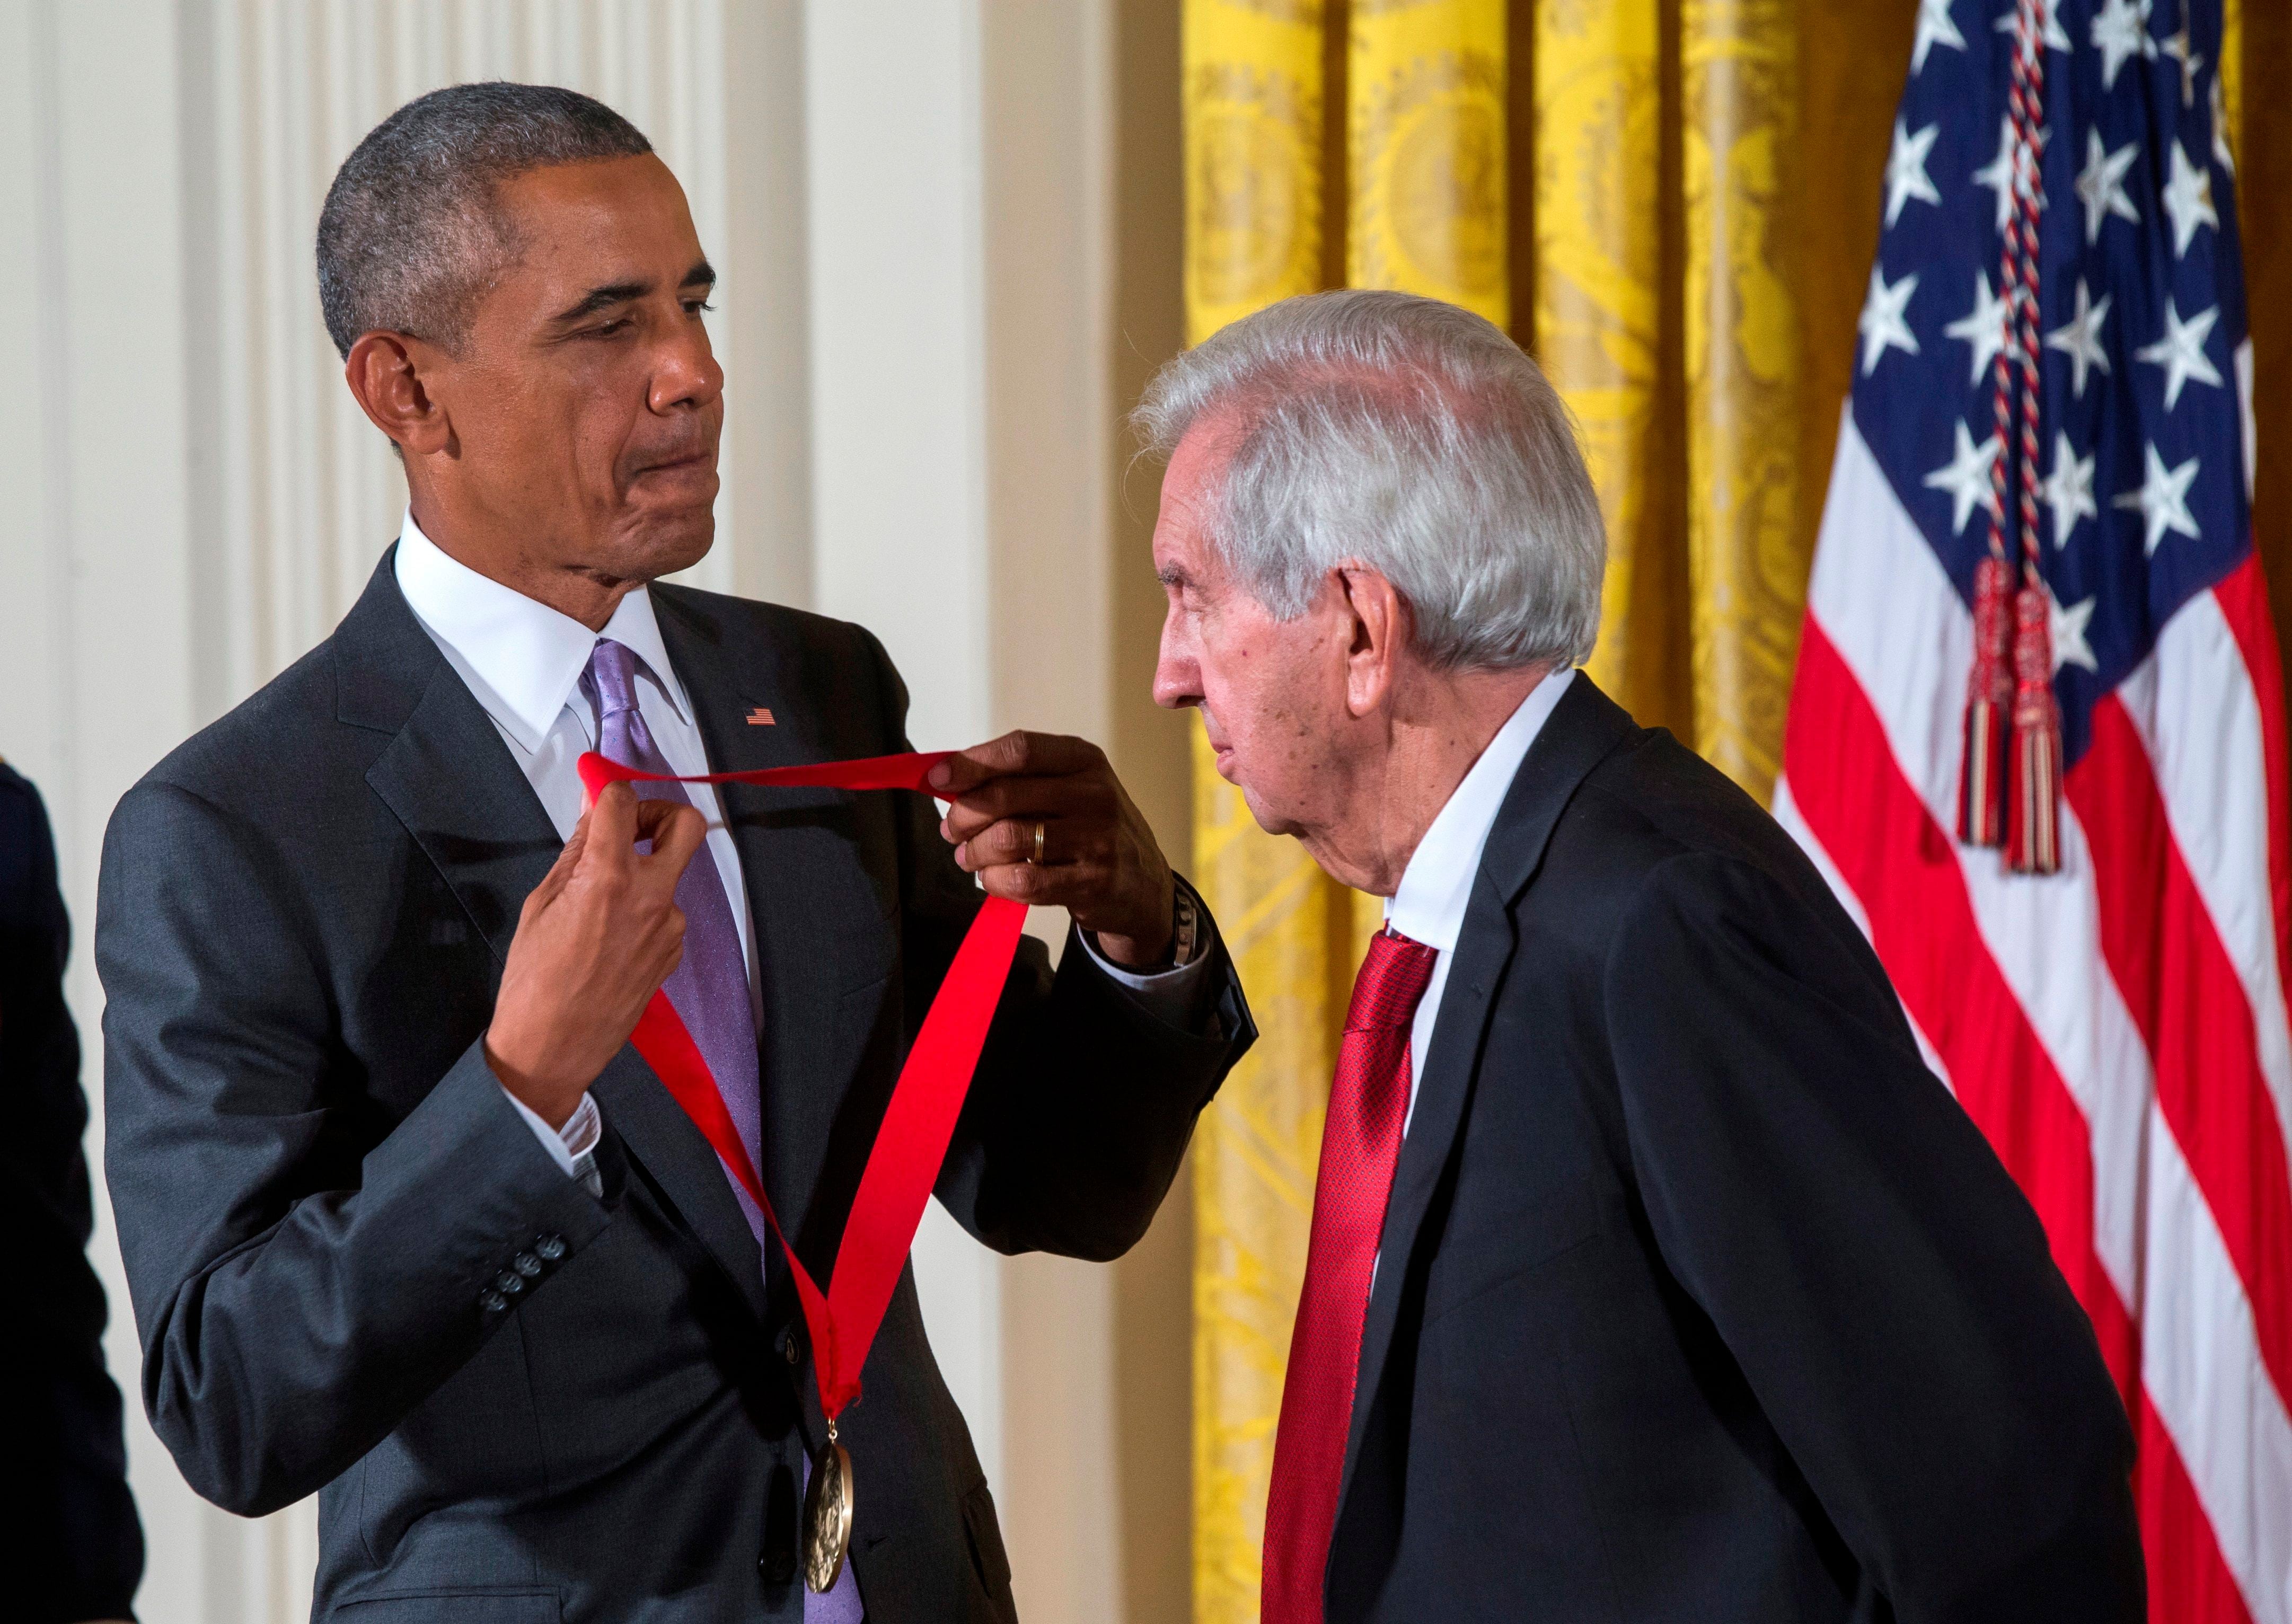 Washington (United States), 10/09/2015.- (FILE) - US President Barack Obama (L) presents a 2014 National Humanities Medal to Larry McMurtry (R), for his books, essays, and screenplays in the East Room of the White House in Washington, DC, USA, 10 September 2015 (reissued 26 March 2021). According to his represantative, Larry McMurtry has died aged 84 on 25 March 2021. (Estados Unidos) EFE/EPA/JIM LO SCALZO
